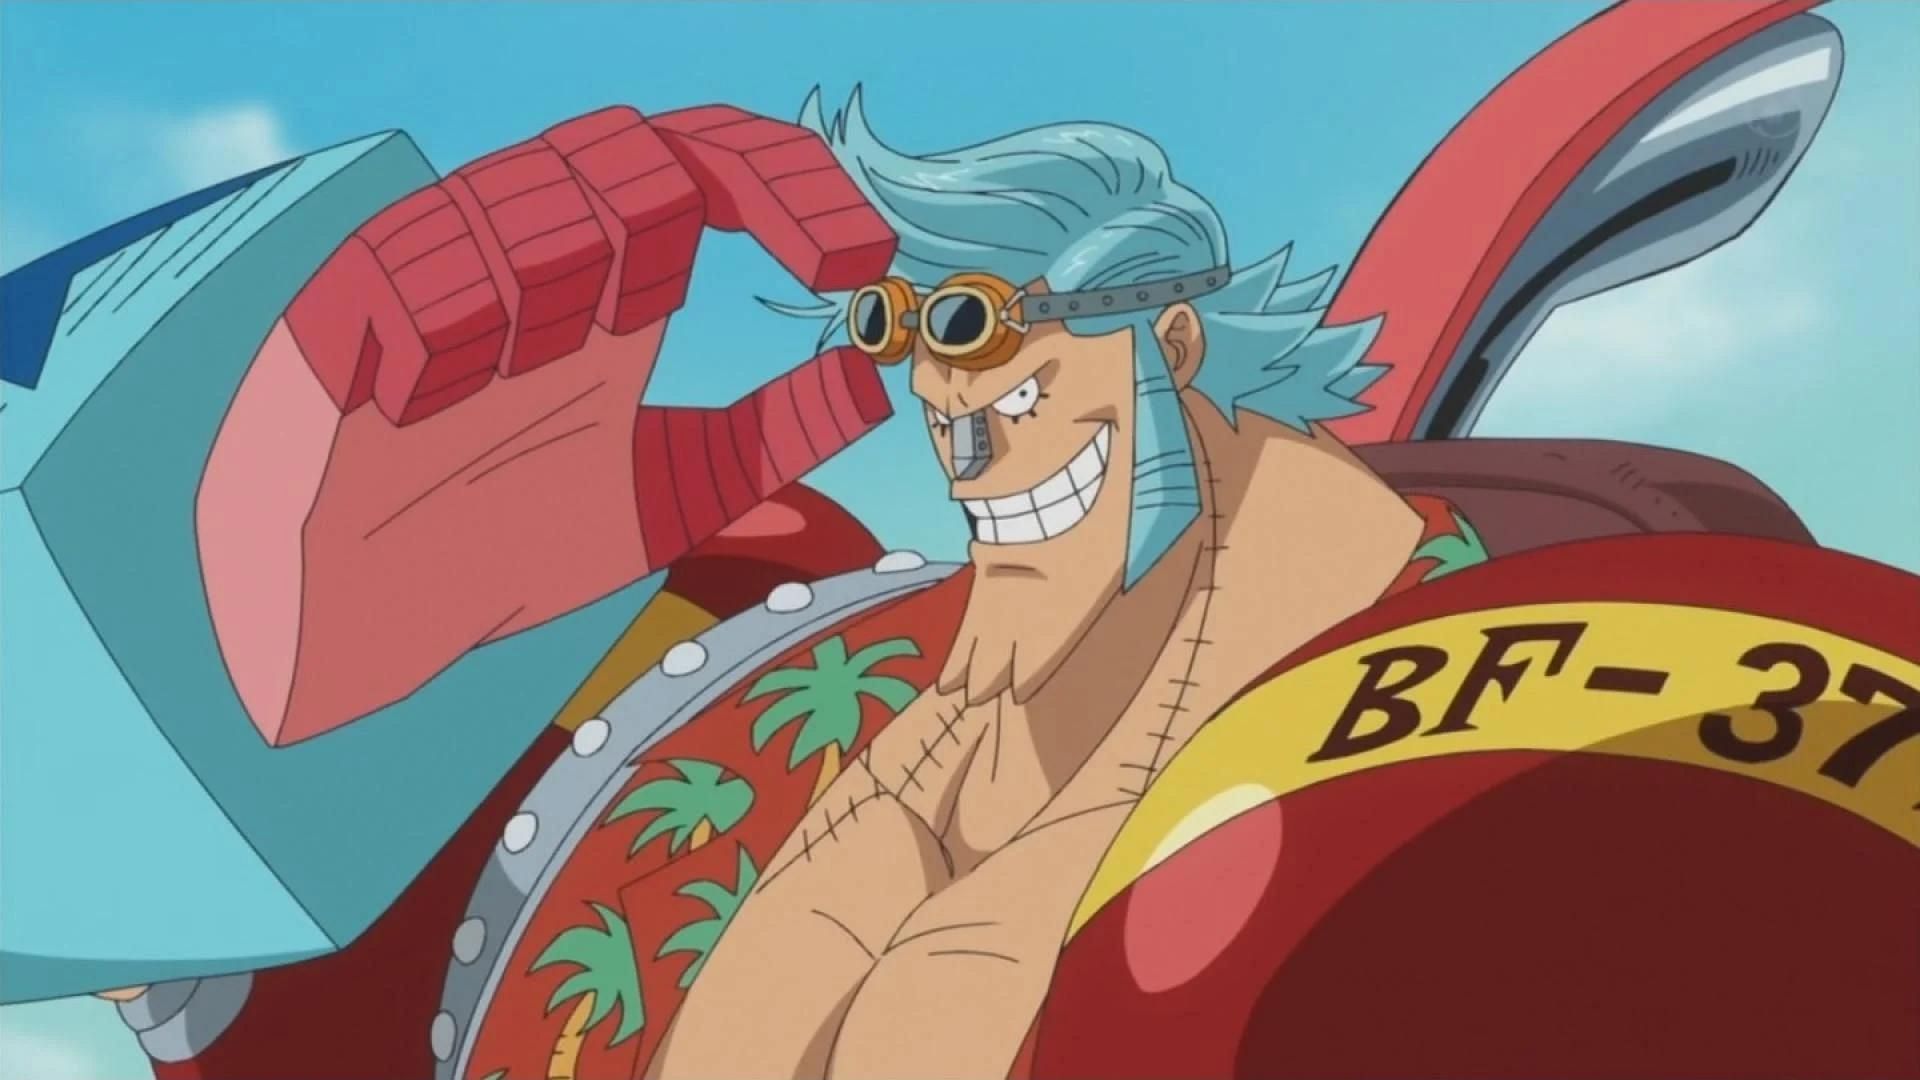 Franky as shown in One Piece anime (Image via Toei Animation)